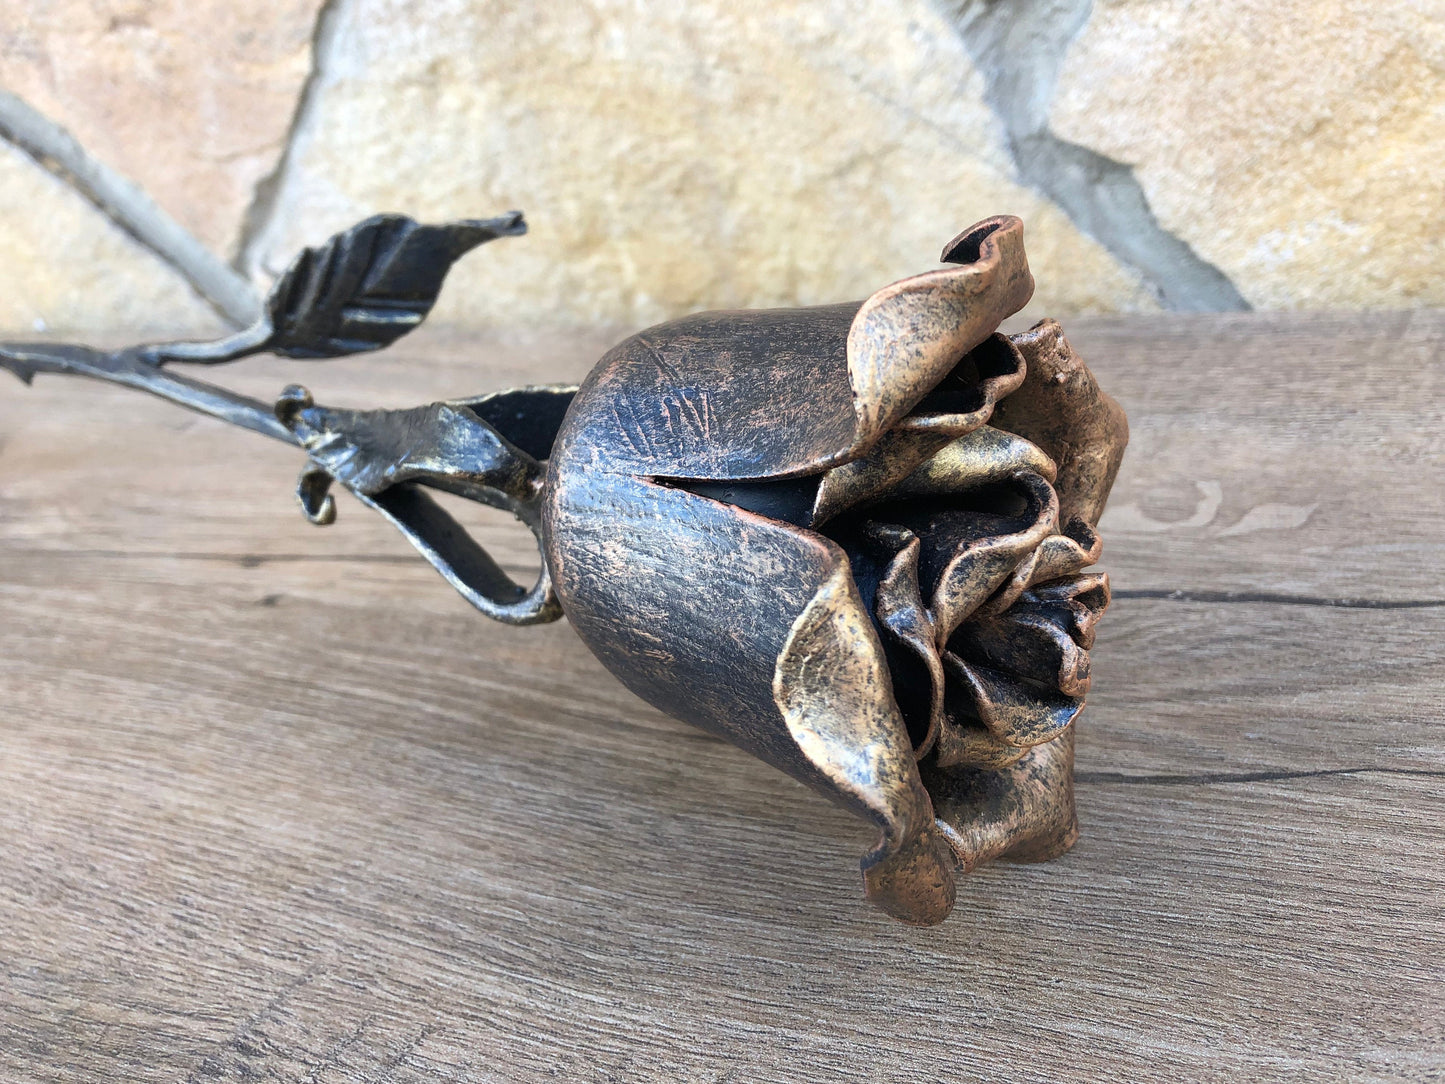 Forged rose, steampunk furniture, iron anniversary gift for her, metal sculpture, wrought iron gift for her, metal statue, anniversary gift